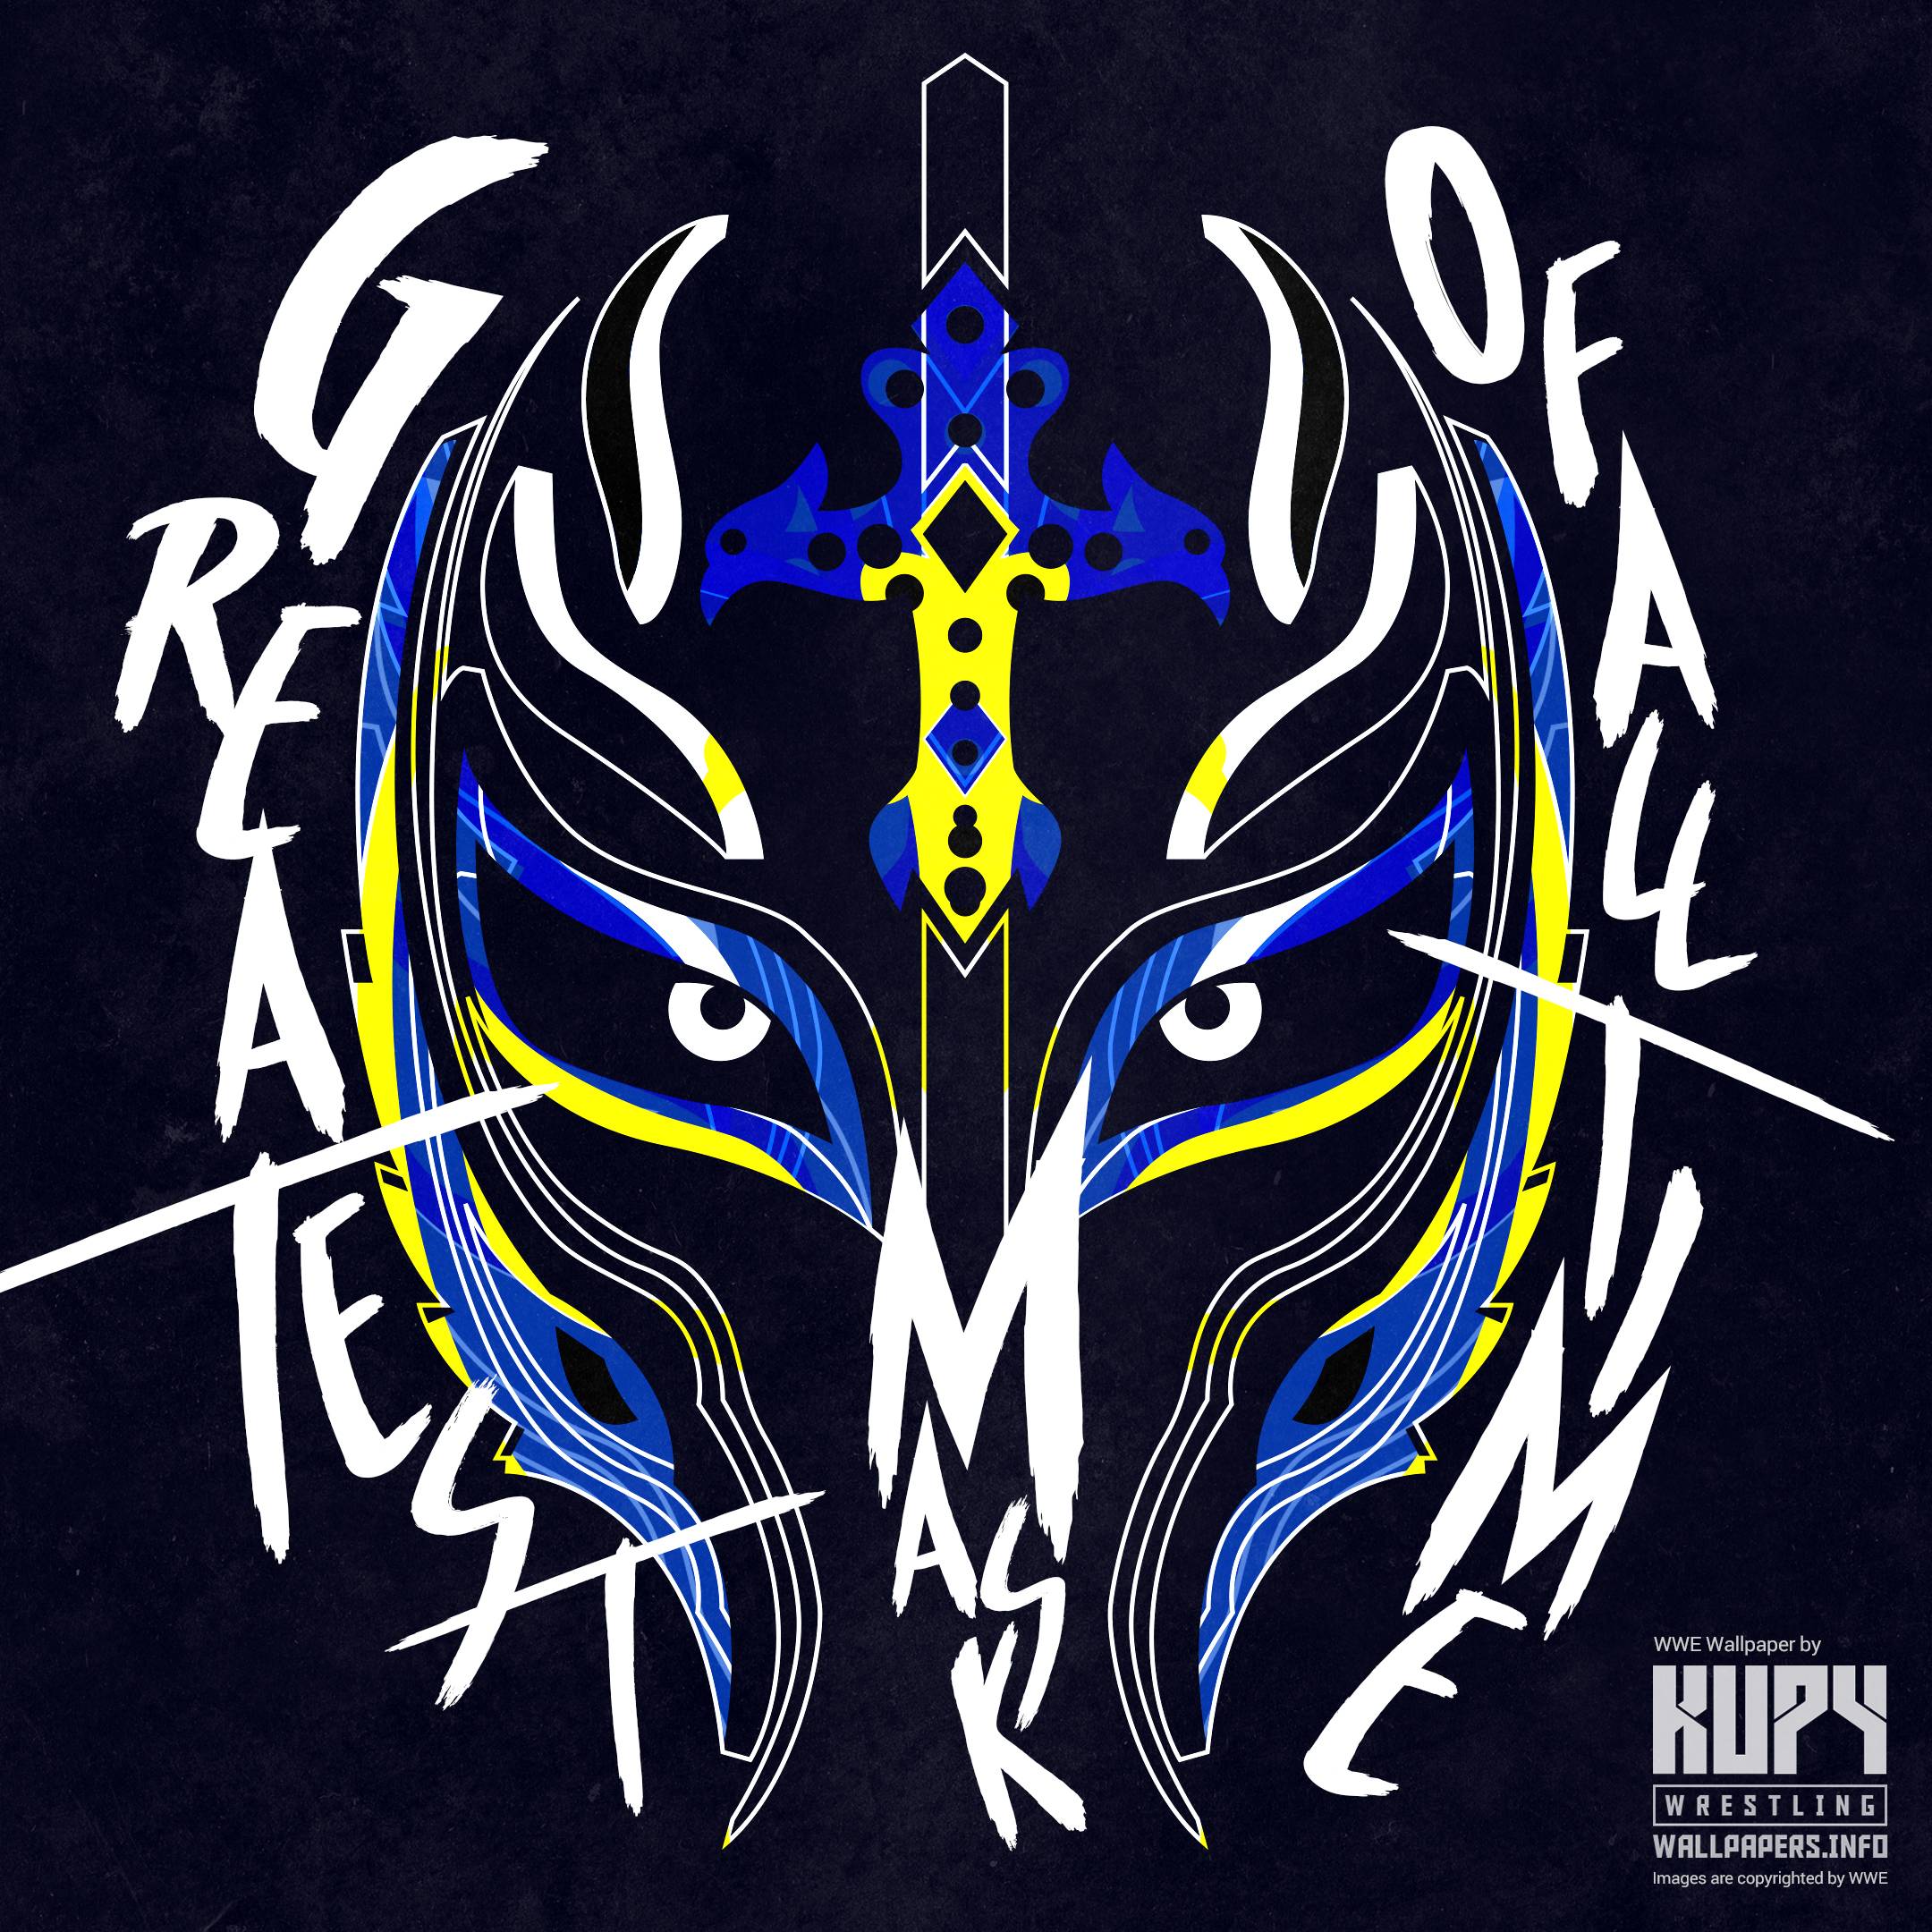 2160x2160 Kupy Wrestling Wallpaper 8211 The Latest Source For Your Wwe Wrestling Wallpaper Needs Mobile Hd And 4k Resolutions Available Blog Archive Rey Mysterio Greatest Mask Of All Time Wallpaper